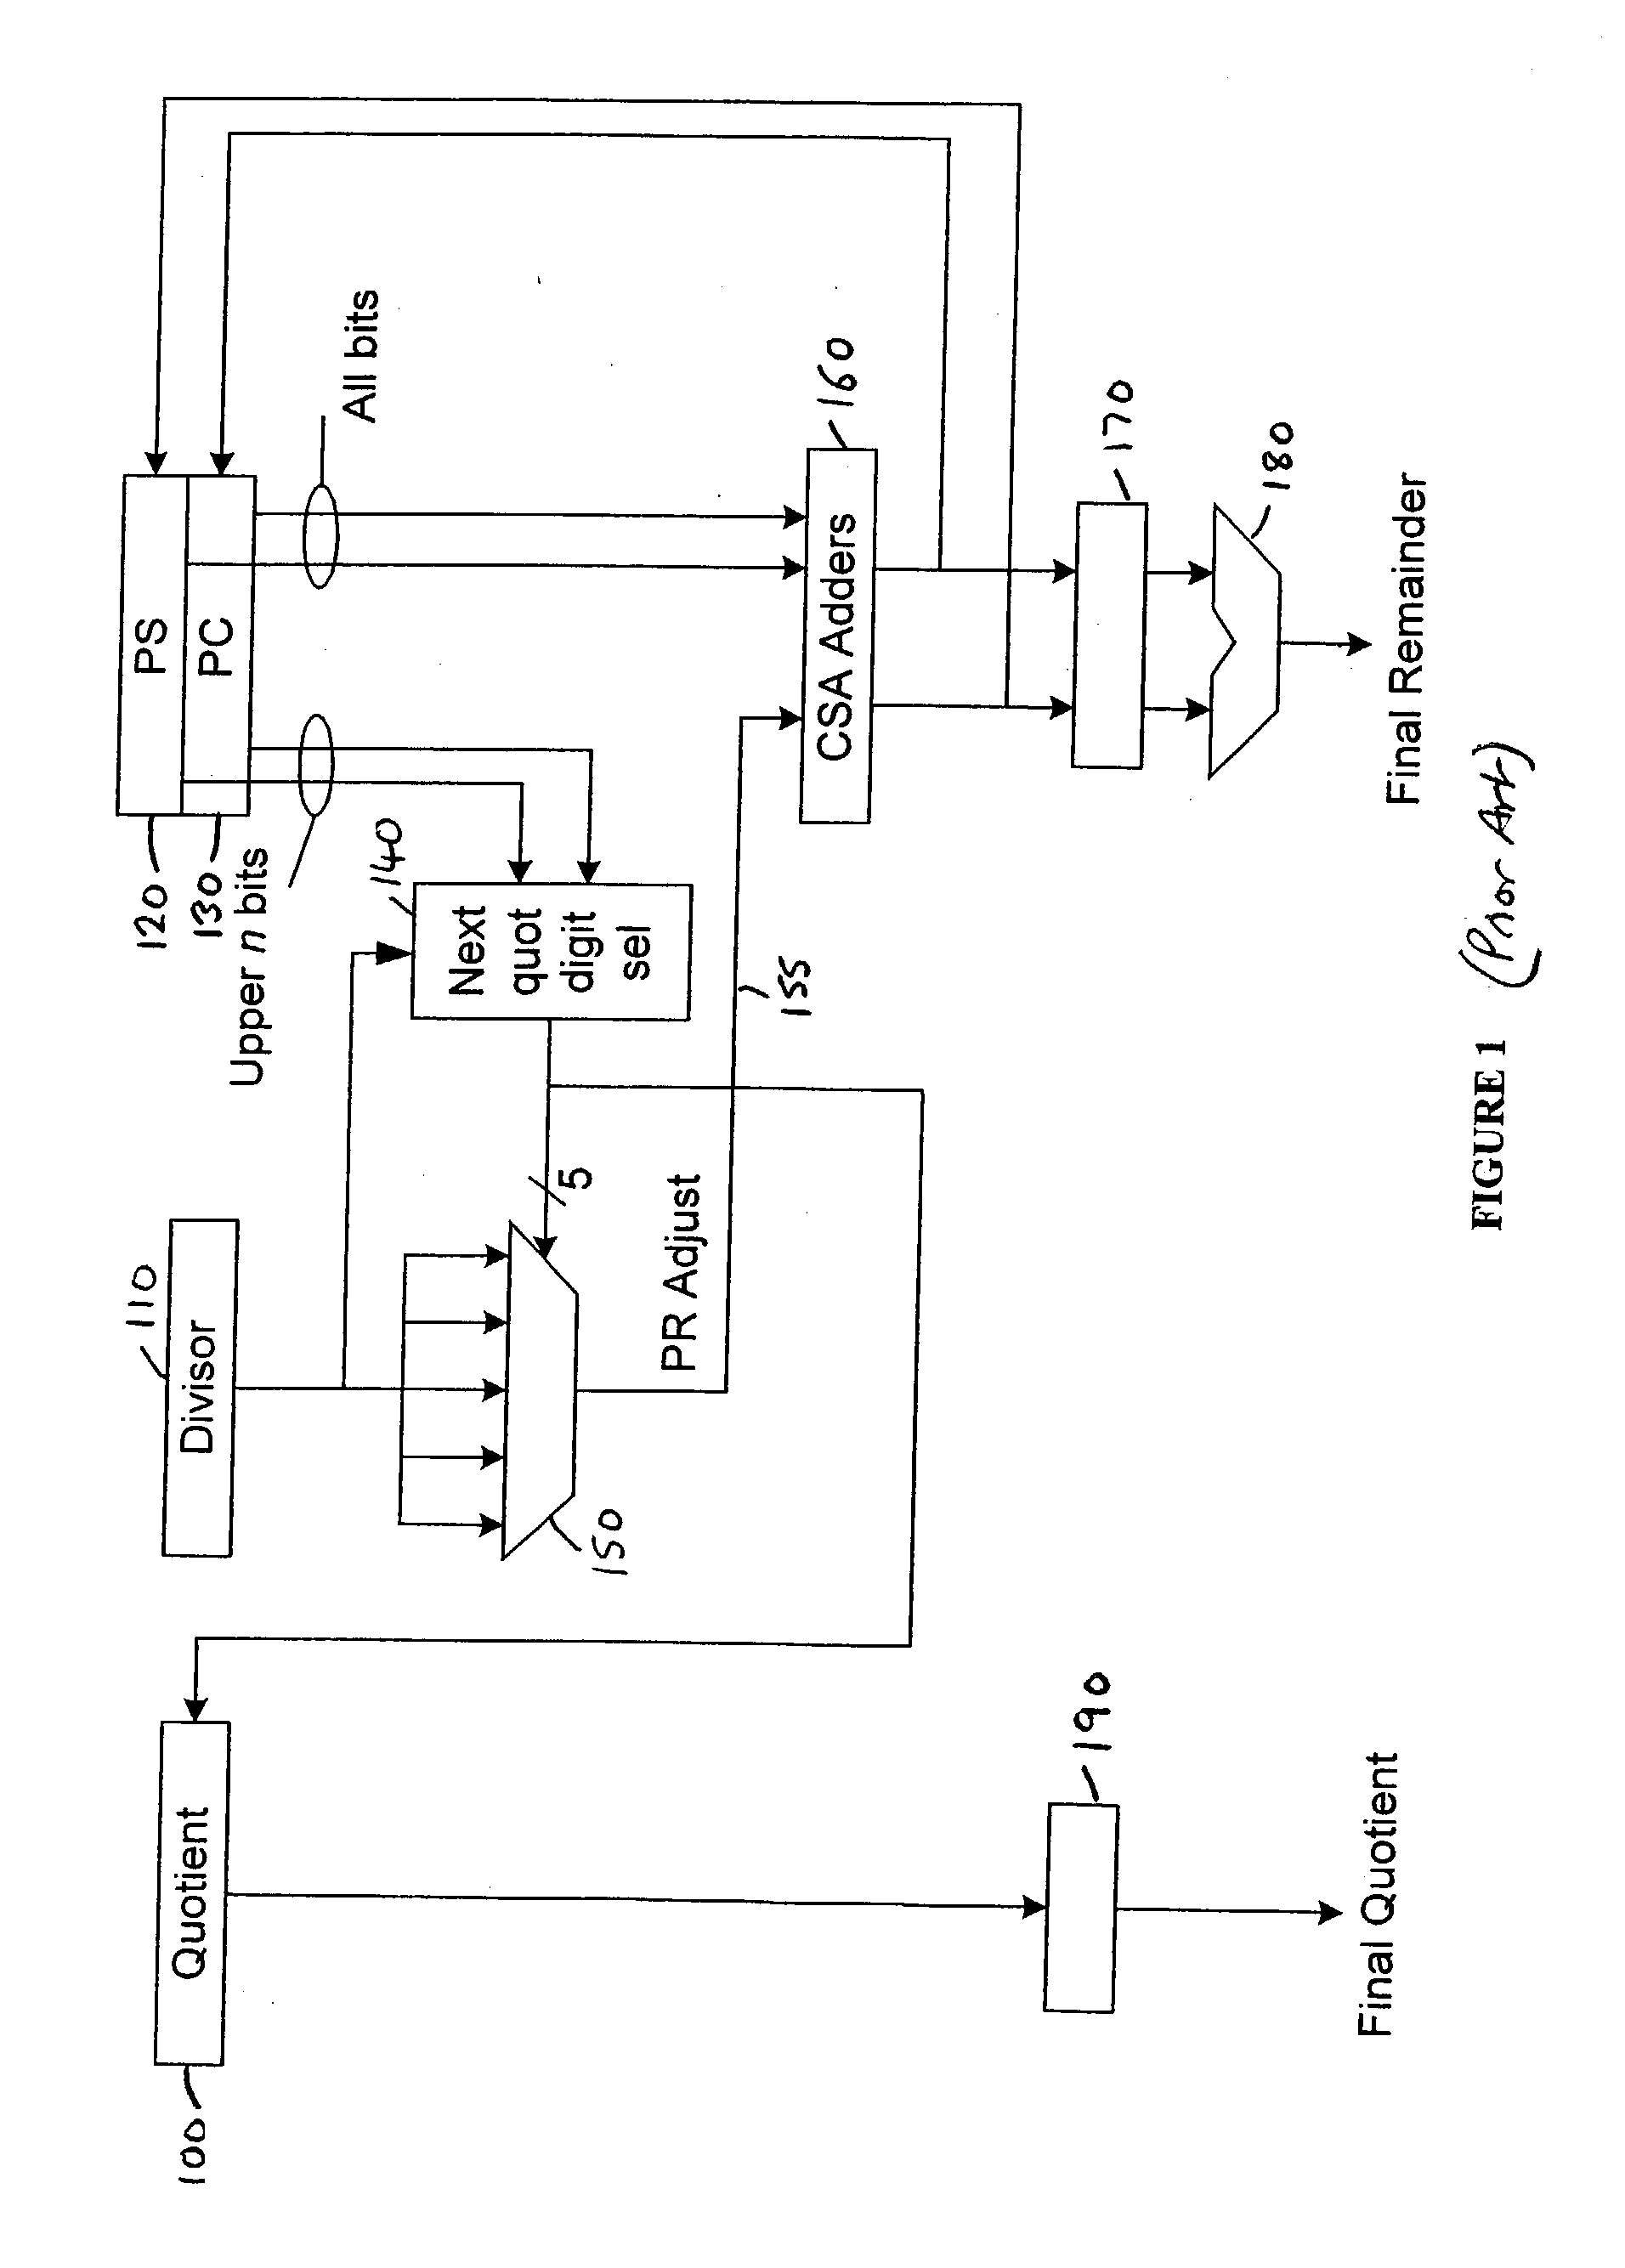 Apparatus and method for performing operations implemented by iterative execution of a recurrence equation